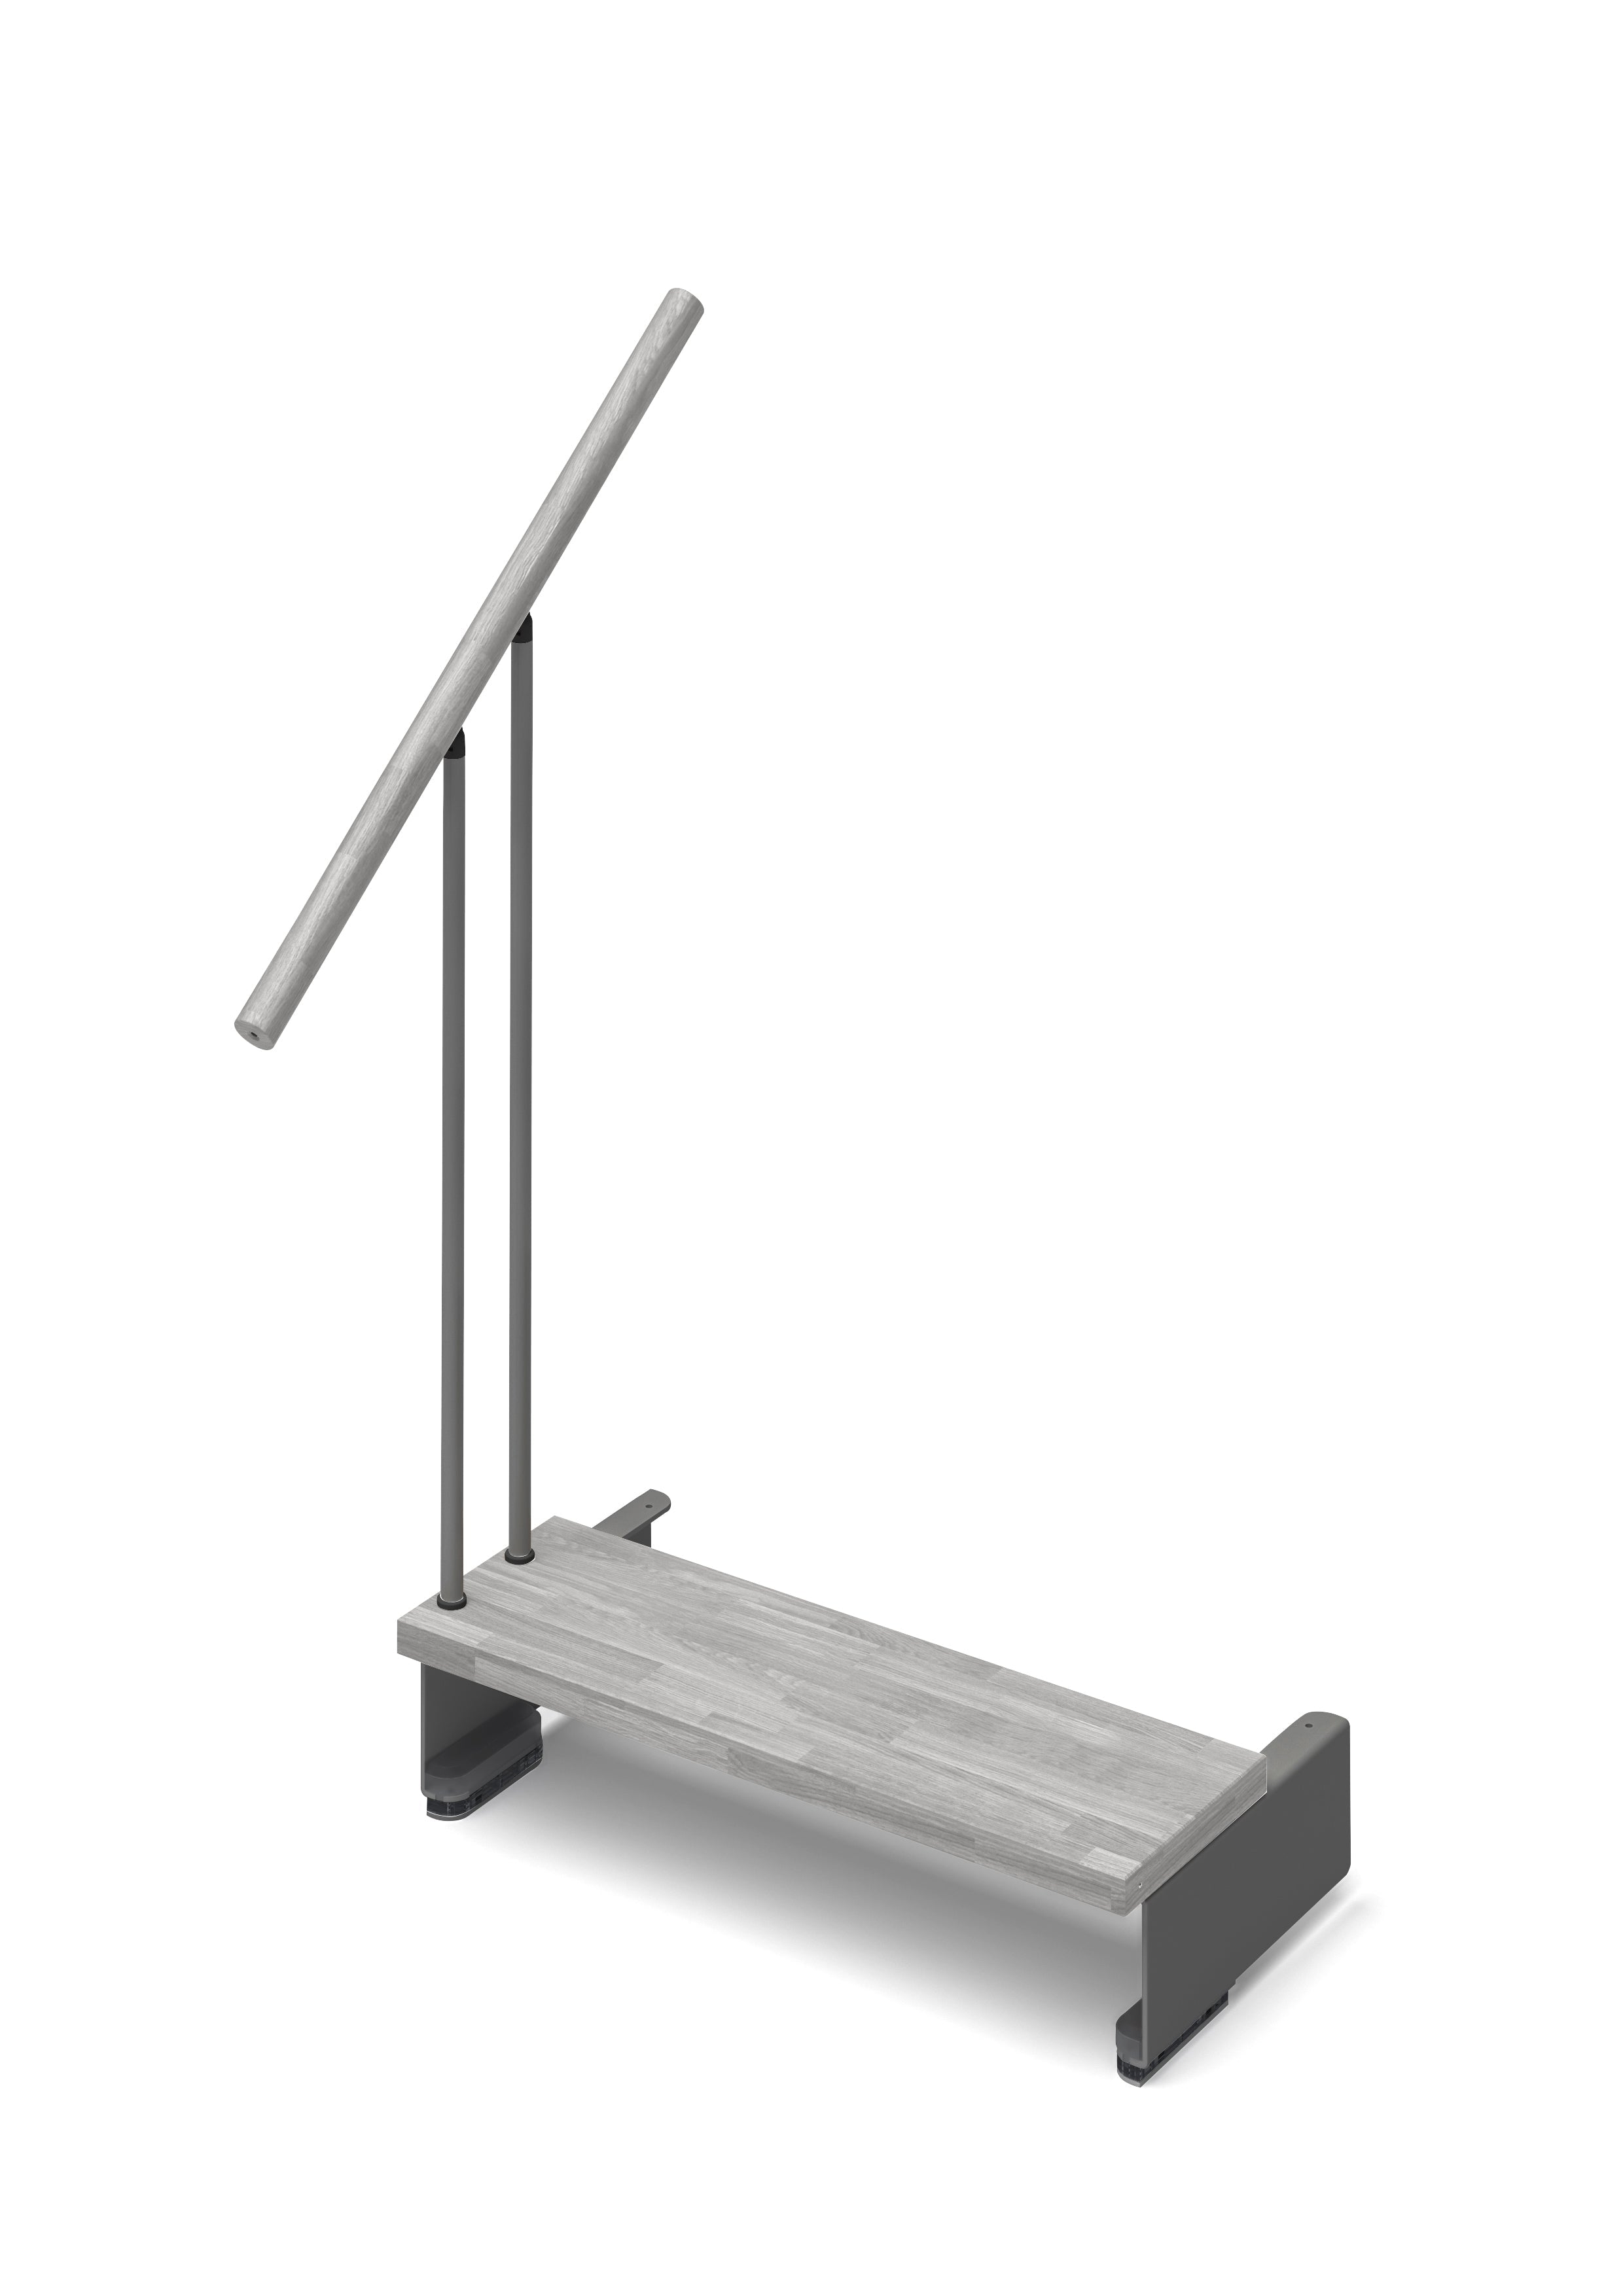 Additional step Adapta 84cm (with structure and railing) - Cement 89